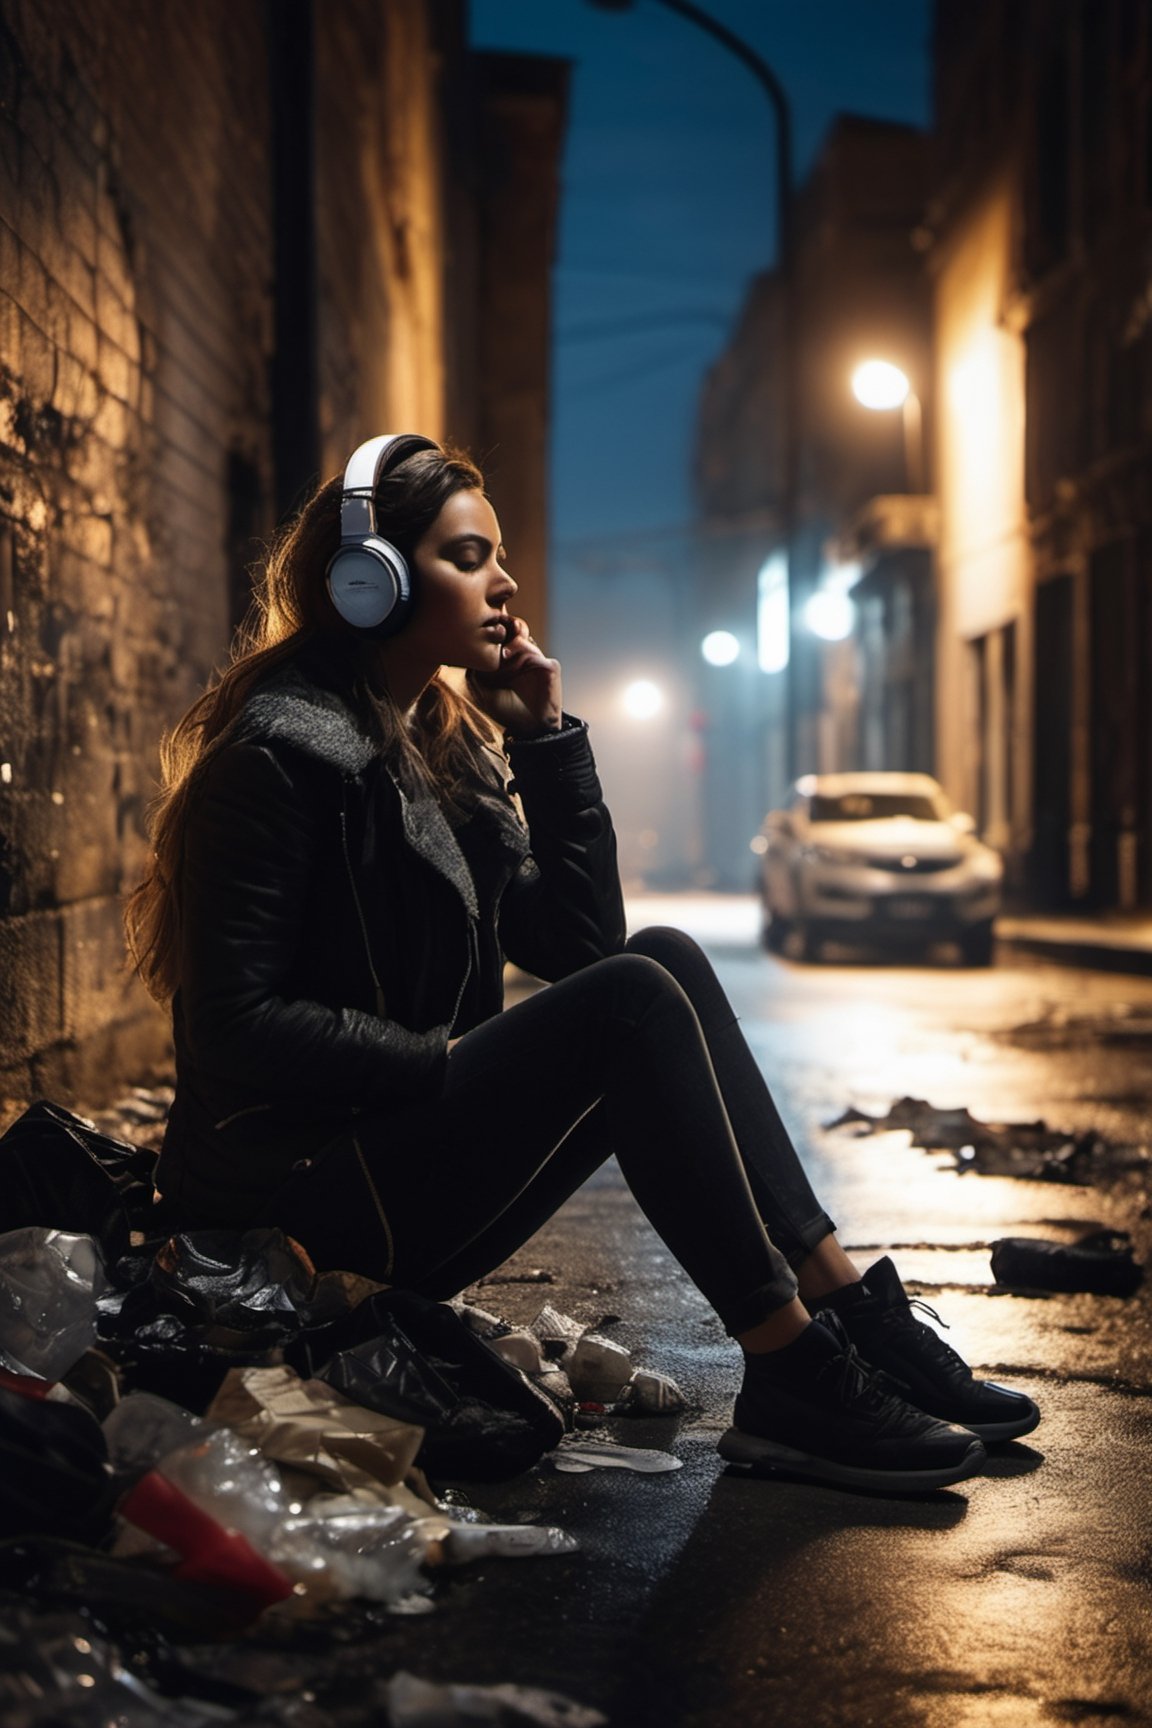 (photorealistic), masterpiece:1.5, beautiful lighting, best quality, beautiful lighting, realistic, real image, intricate details, everything in razor sharp focus, perfect focus, 

Generate a visually striking and emotionally evocative image featuring a woman sitting alone on a dark road, wearing headphones and surrounded by scattered garbage. Convey a sense of isolation and contrast by capturing the solitude of the woman against the dimly lit and desolate environment. Utilize generative techniques to highlight the details of the woman, the headphones, and the surrounding discarded items. Simulate the use of a professional camera, such as a Nikon Z6, to achieve a high-quality shot in low-light conditions, emphasizing the atmospheric ambiance. Craft an image that elicits a mix of emotions, exploring themes of isolation, introspection, and resilience in the midst of urban decay,photo r3al,detailmaster2